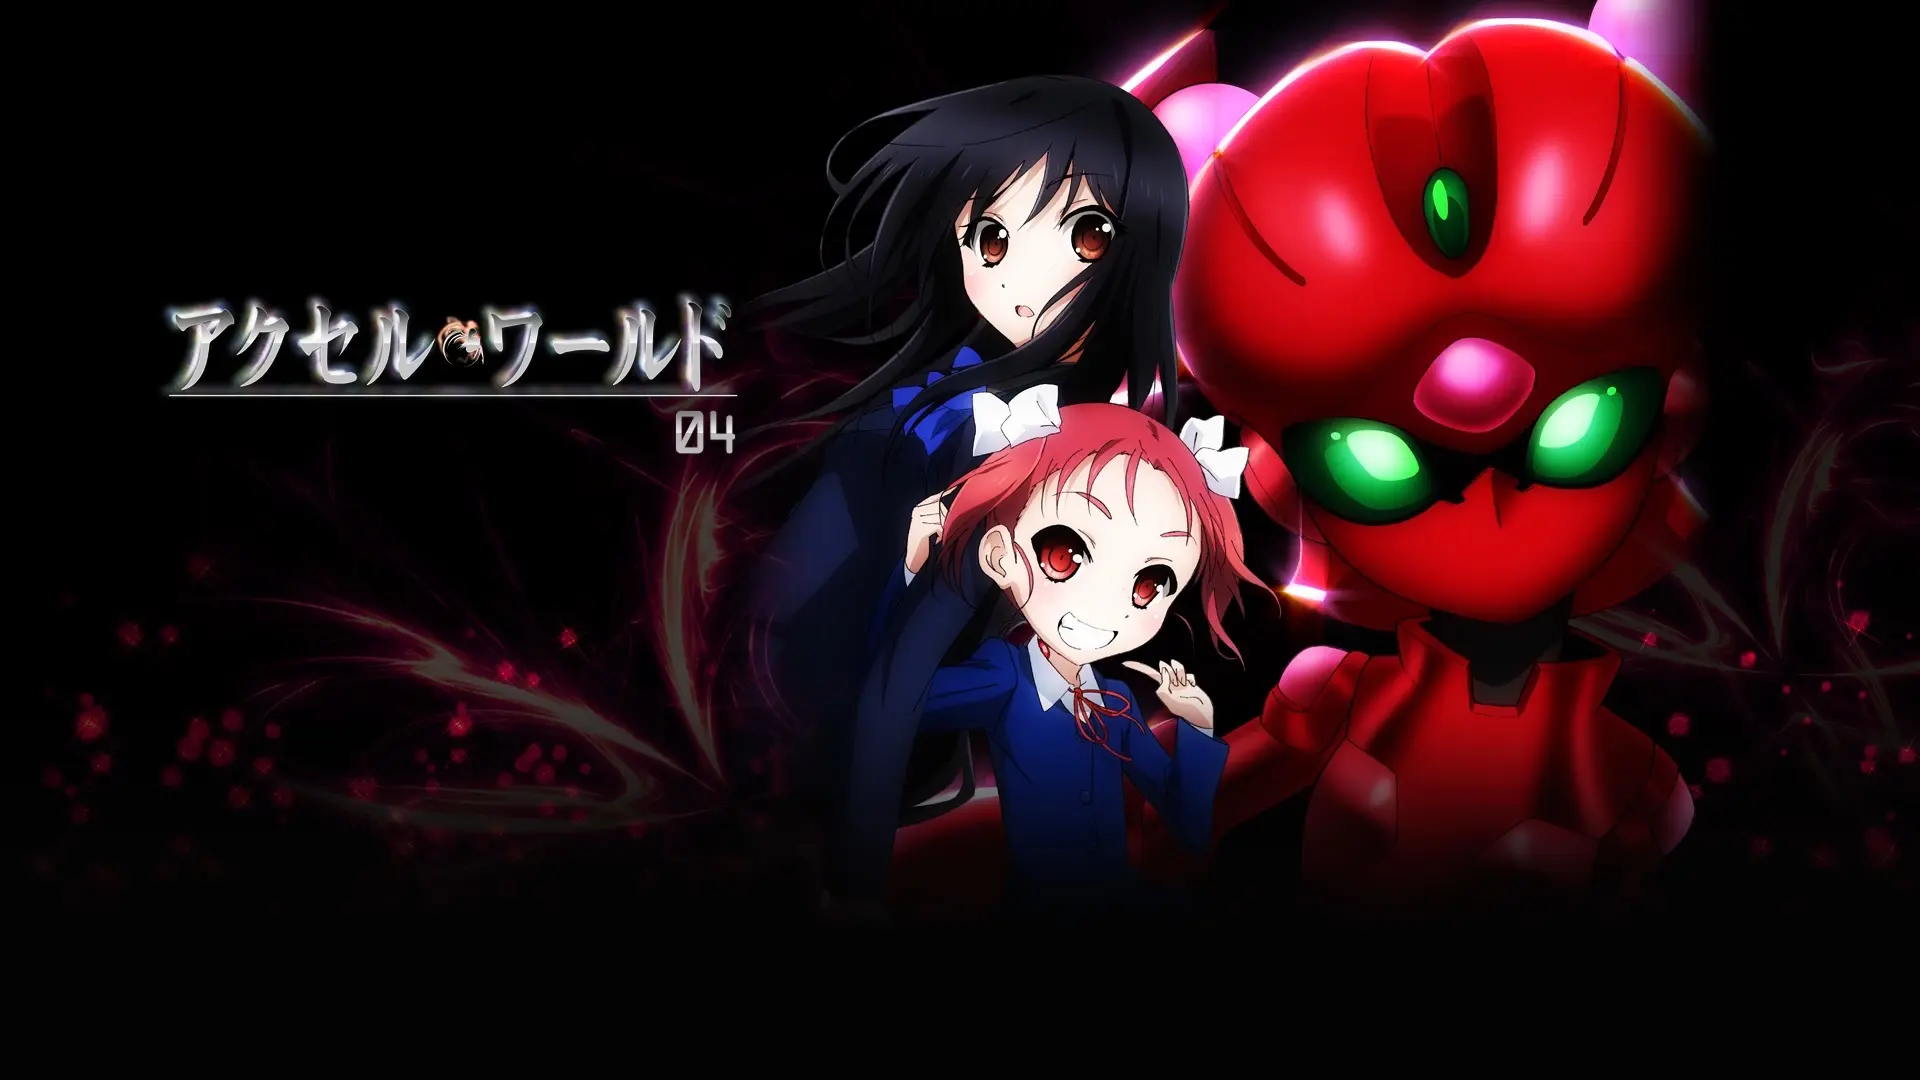 Anime Accel World wallpaper 3 | Background Image